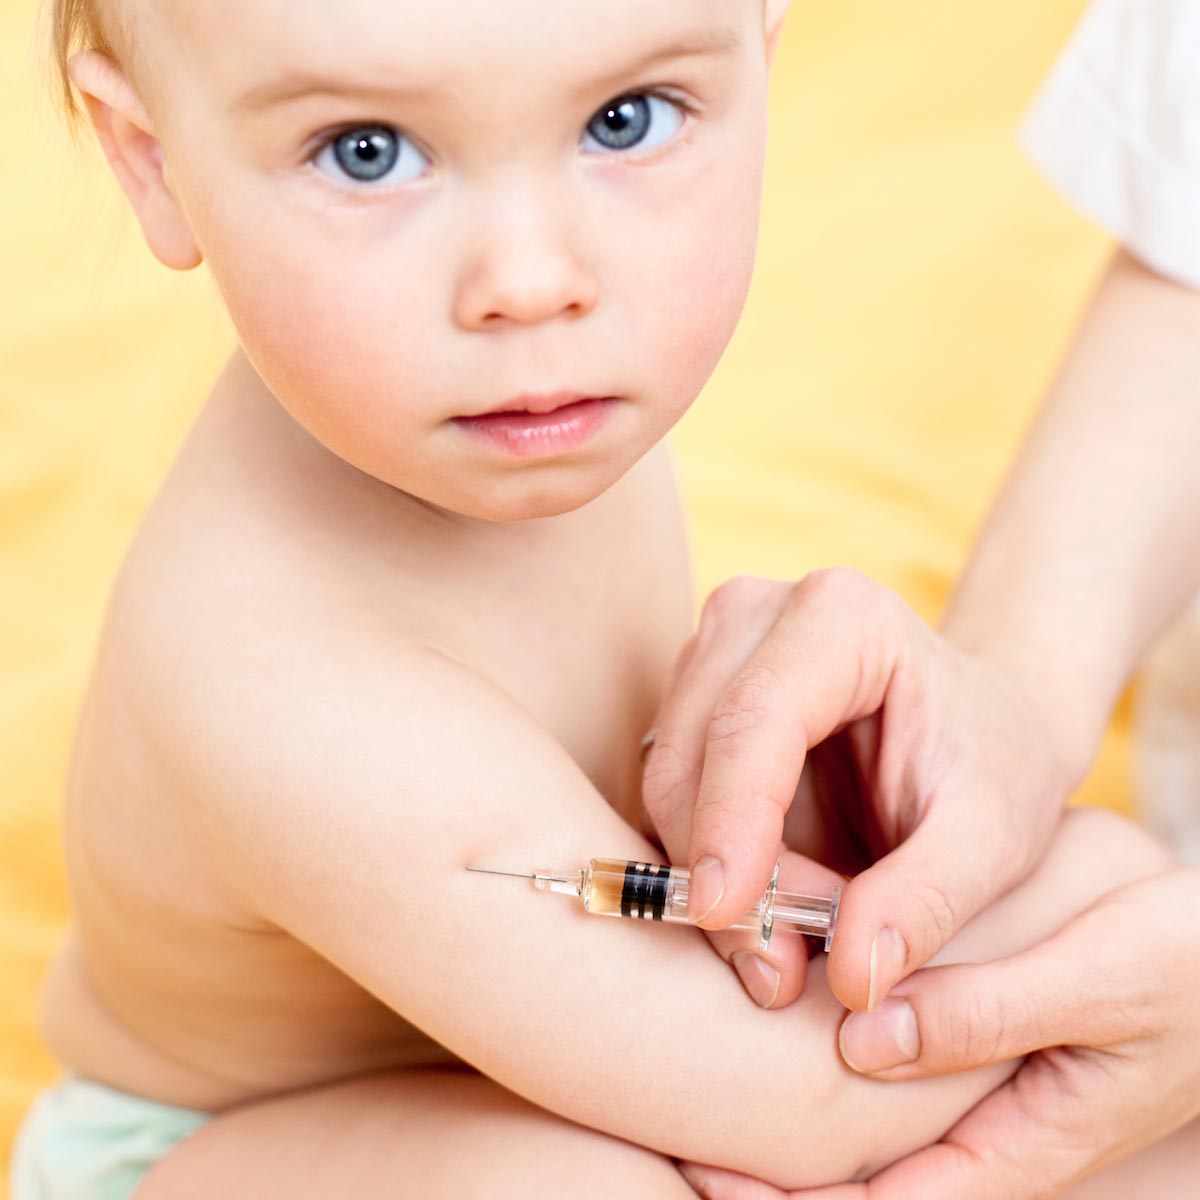 Doctors agree with censored study that concludes unvaccinated children are healthier than vaccinated children